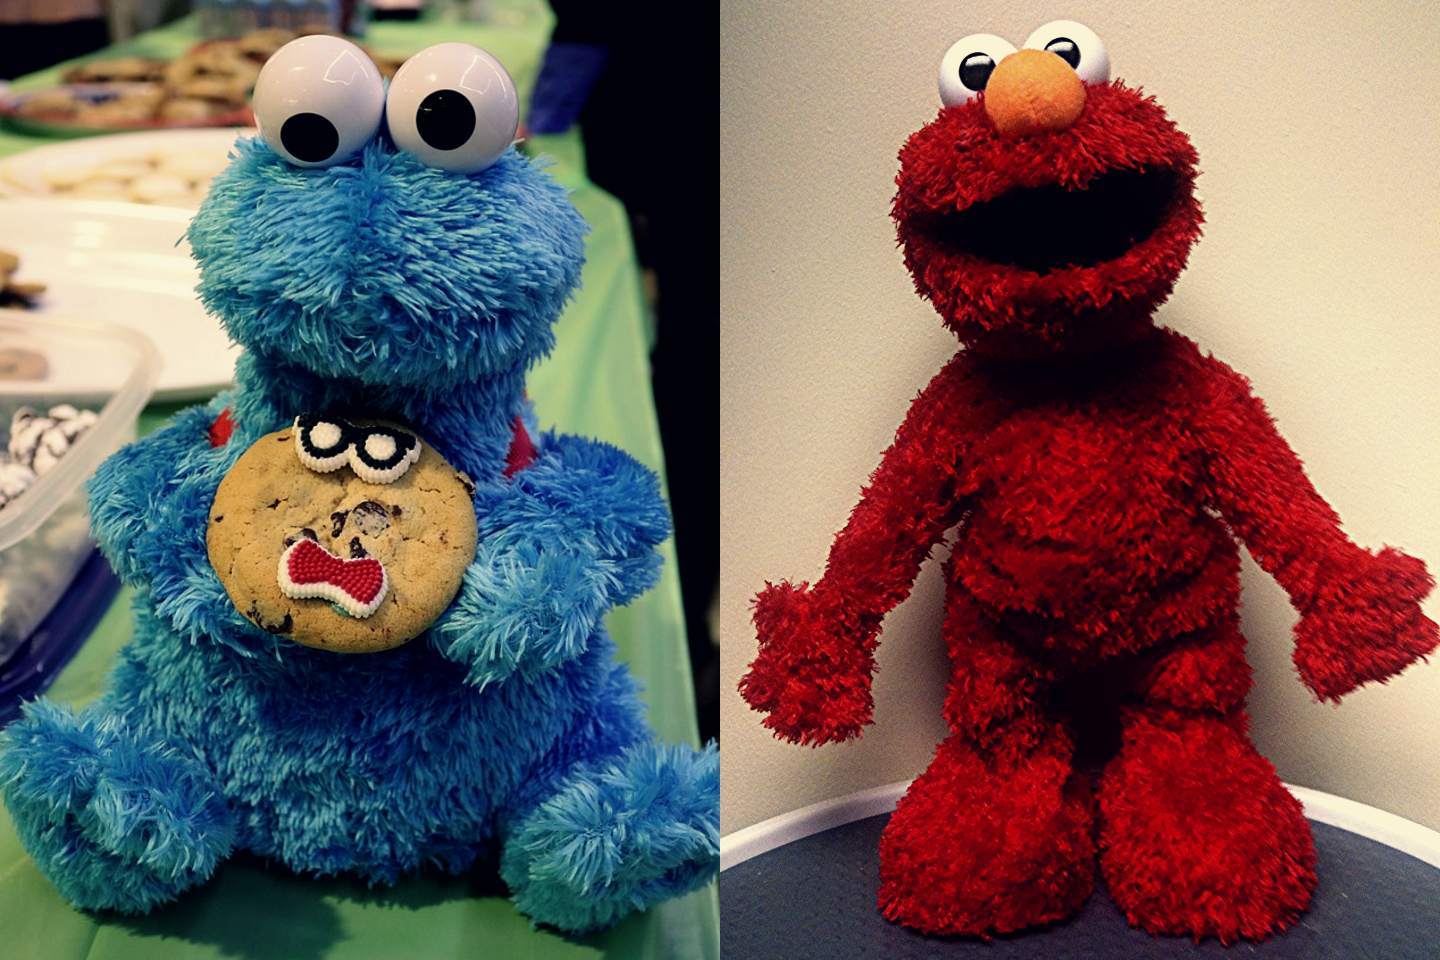 The Cookie Monster Doll And The Elmo Doll. 